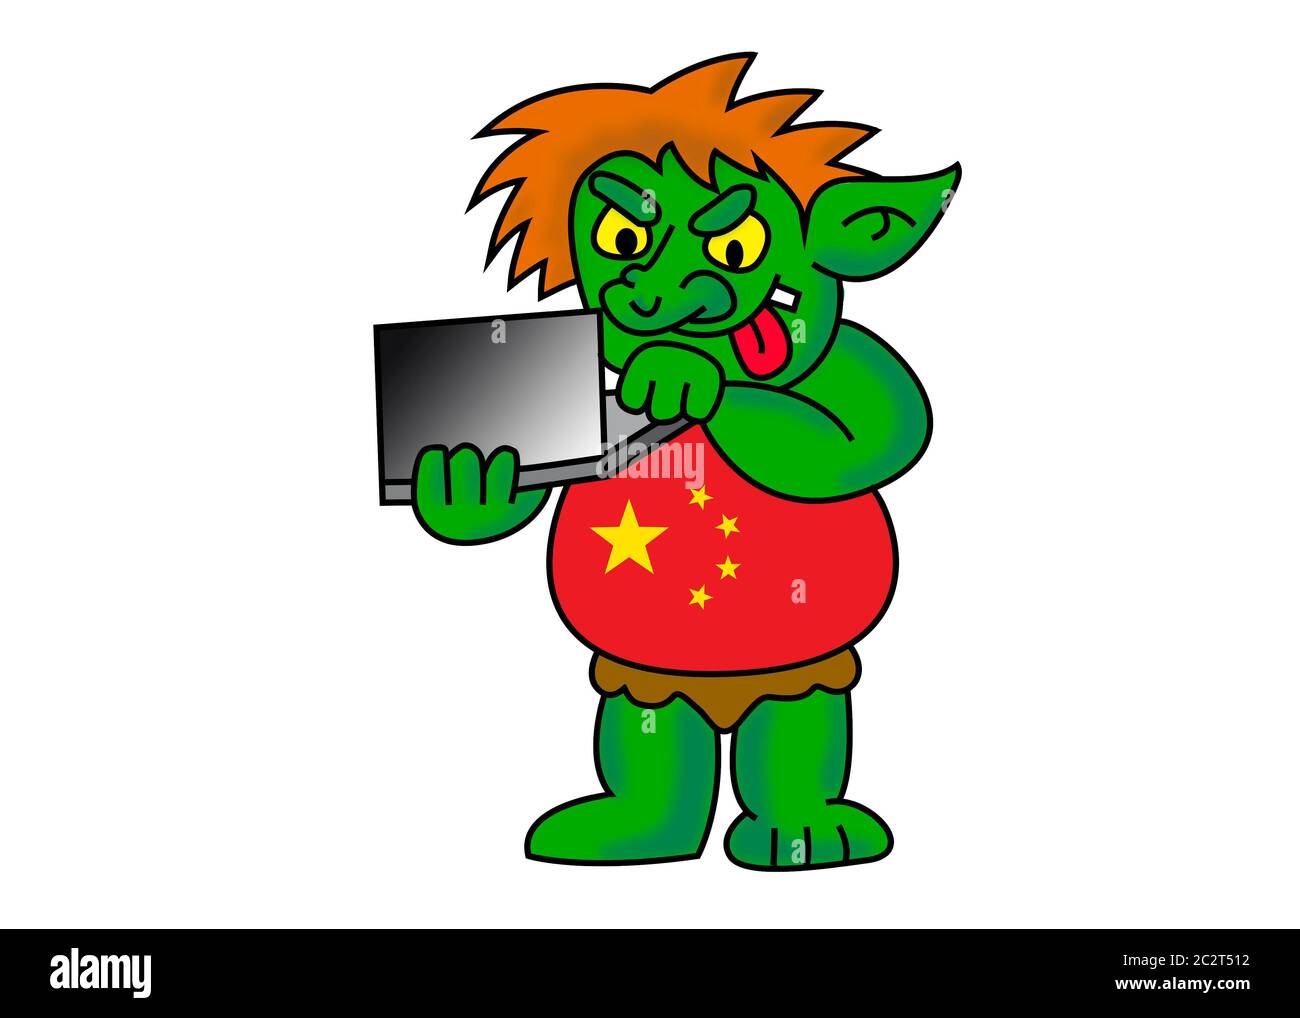 China internet troll. Funny cartoon illustration of green Chinese computer  hacker with t-shirt like the Chinese flag. Image isolated on white. Image i  Stock Photo - Alamy